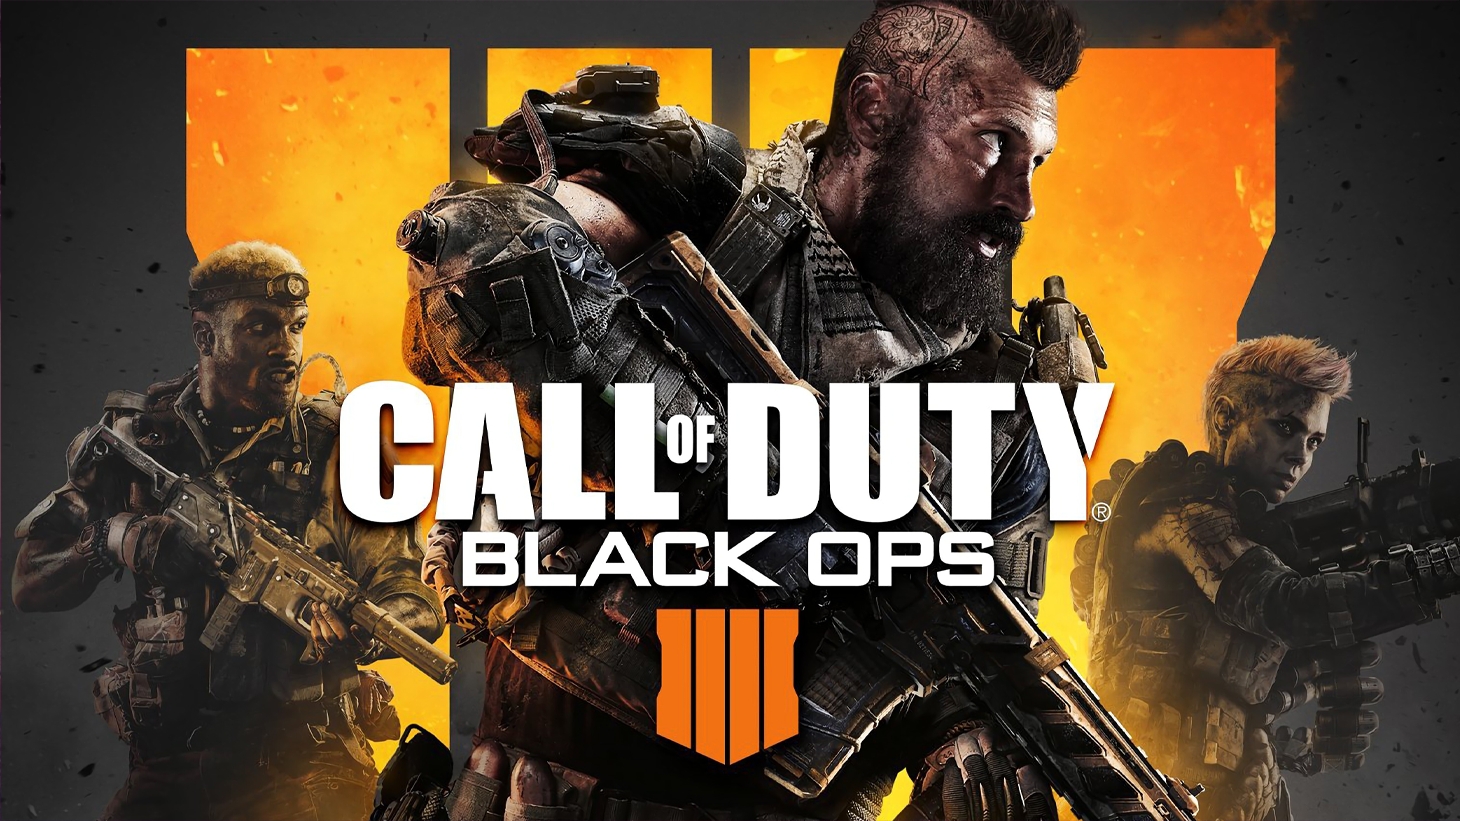 black ops 3 ps3 price